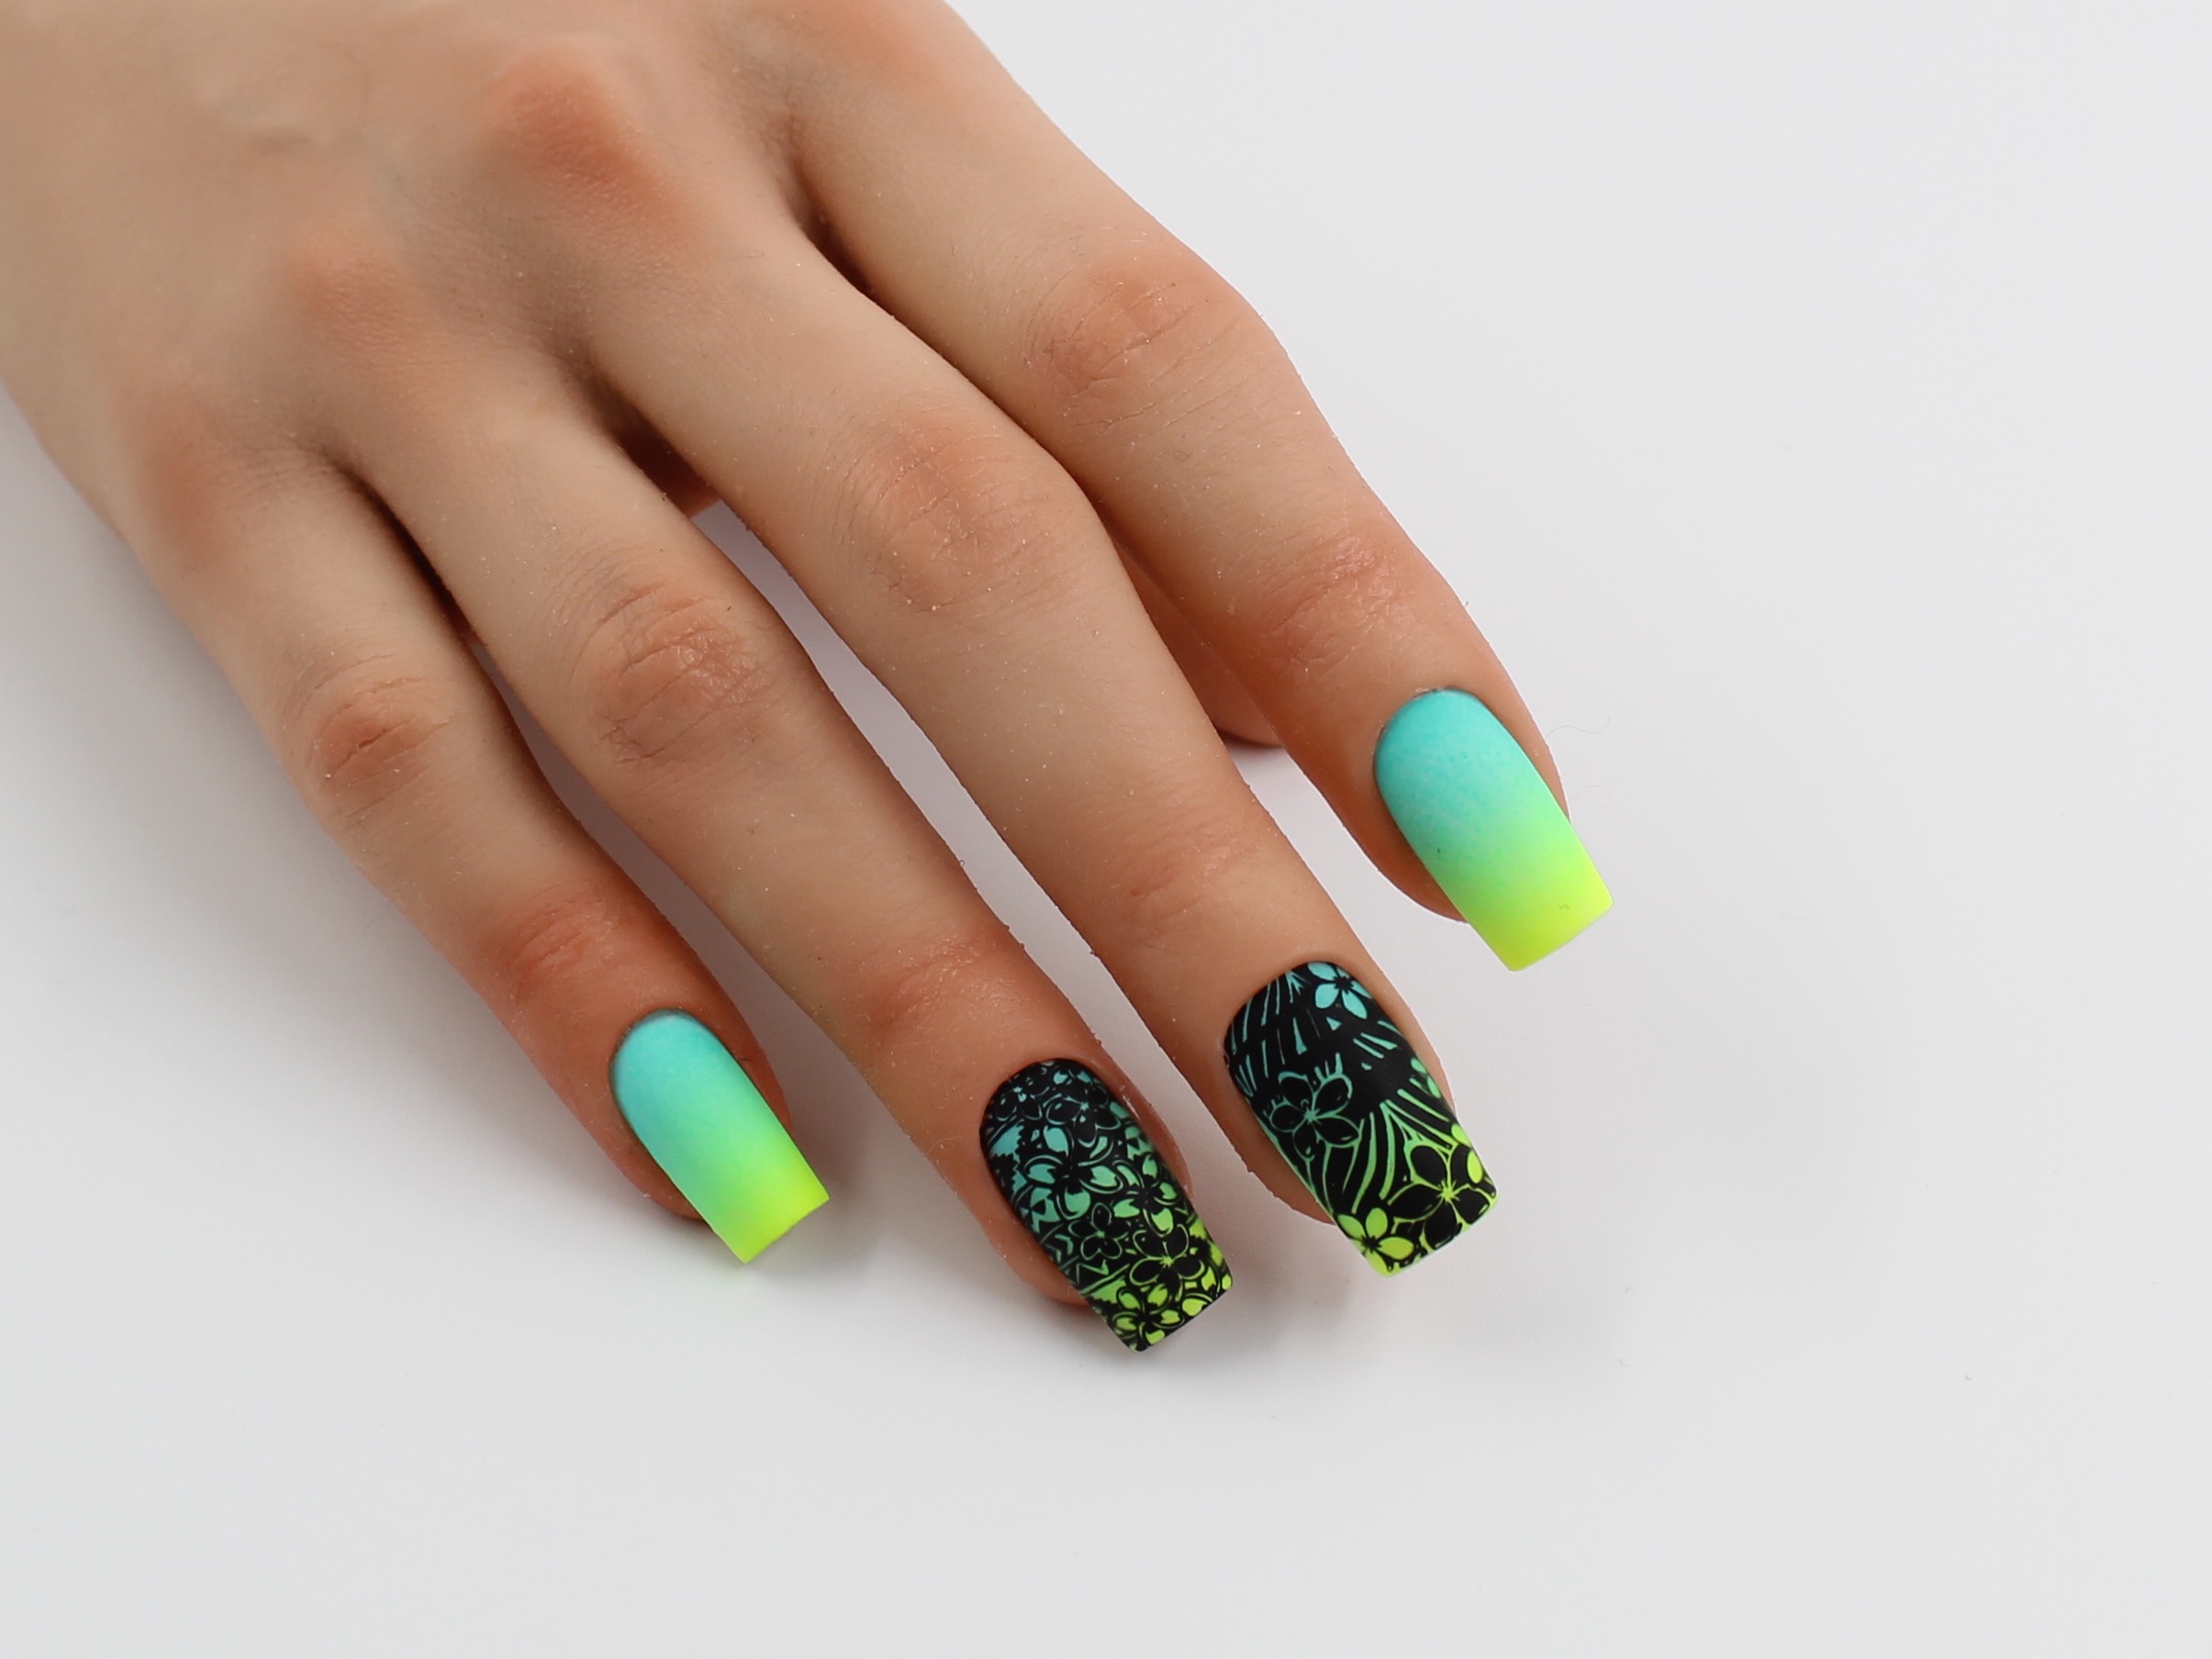 1. Bright tropical nail design with rhinestones - wide 8